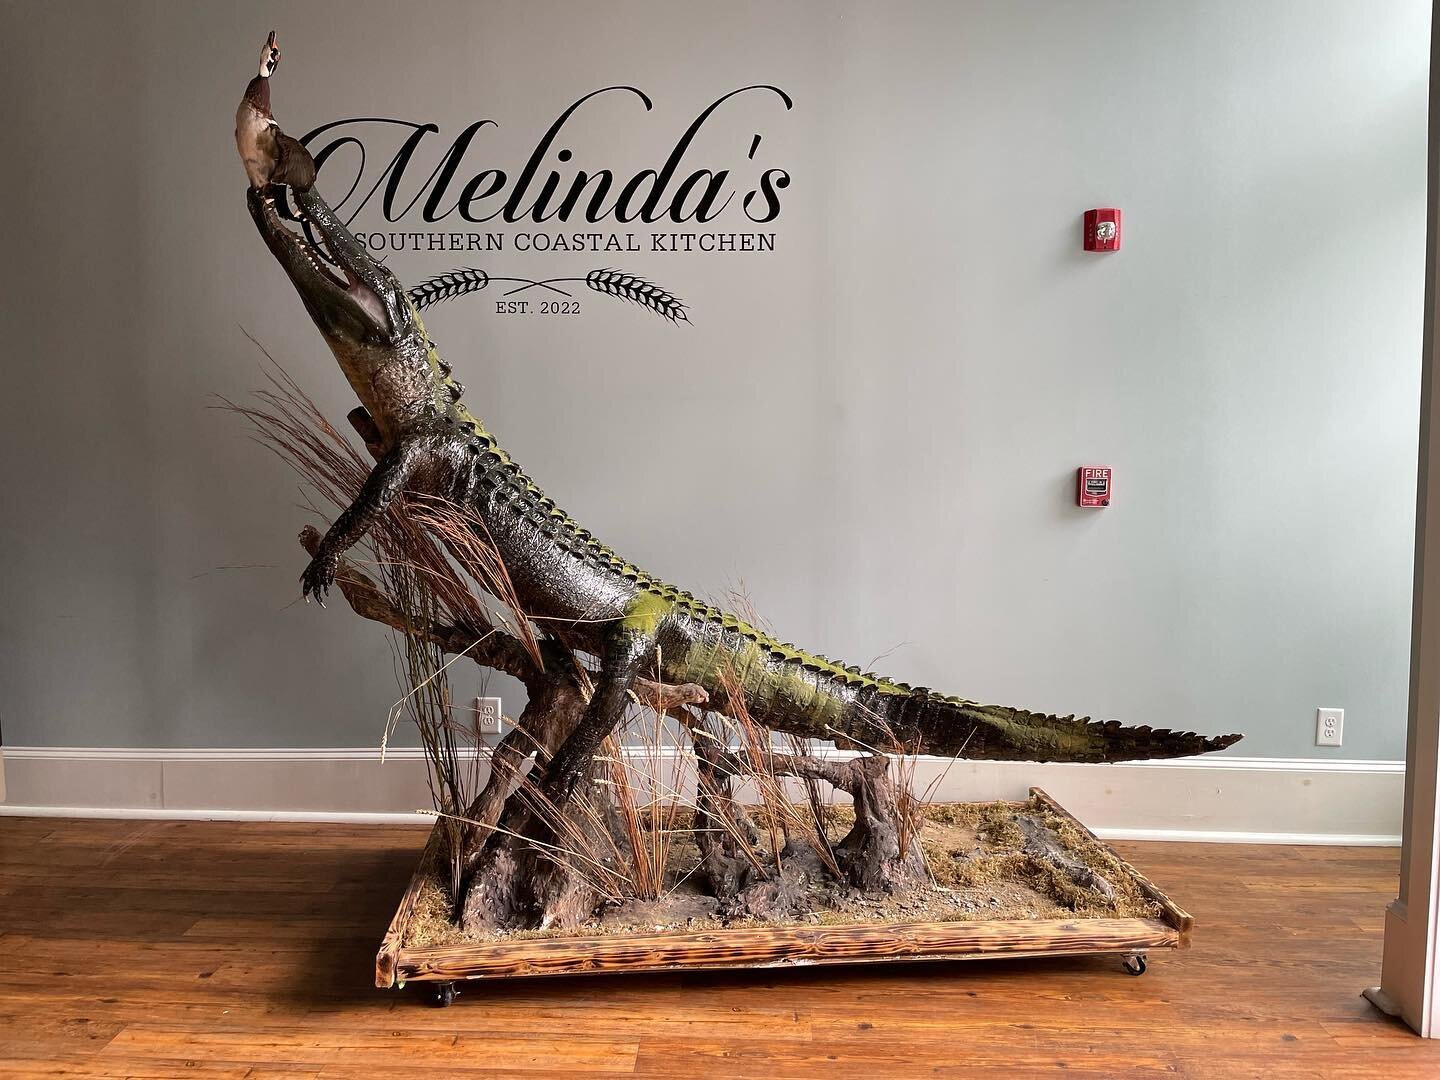 Y&rsquo;all make sure to go check out this beast @melindassoutherncoastalkitchen  down on broad street!! #taxidermy #taxidermist #taxidermydecor #restaurant #hunting #outdoors #reptile #alligator #fyp #fypシ